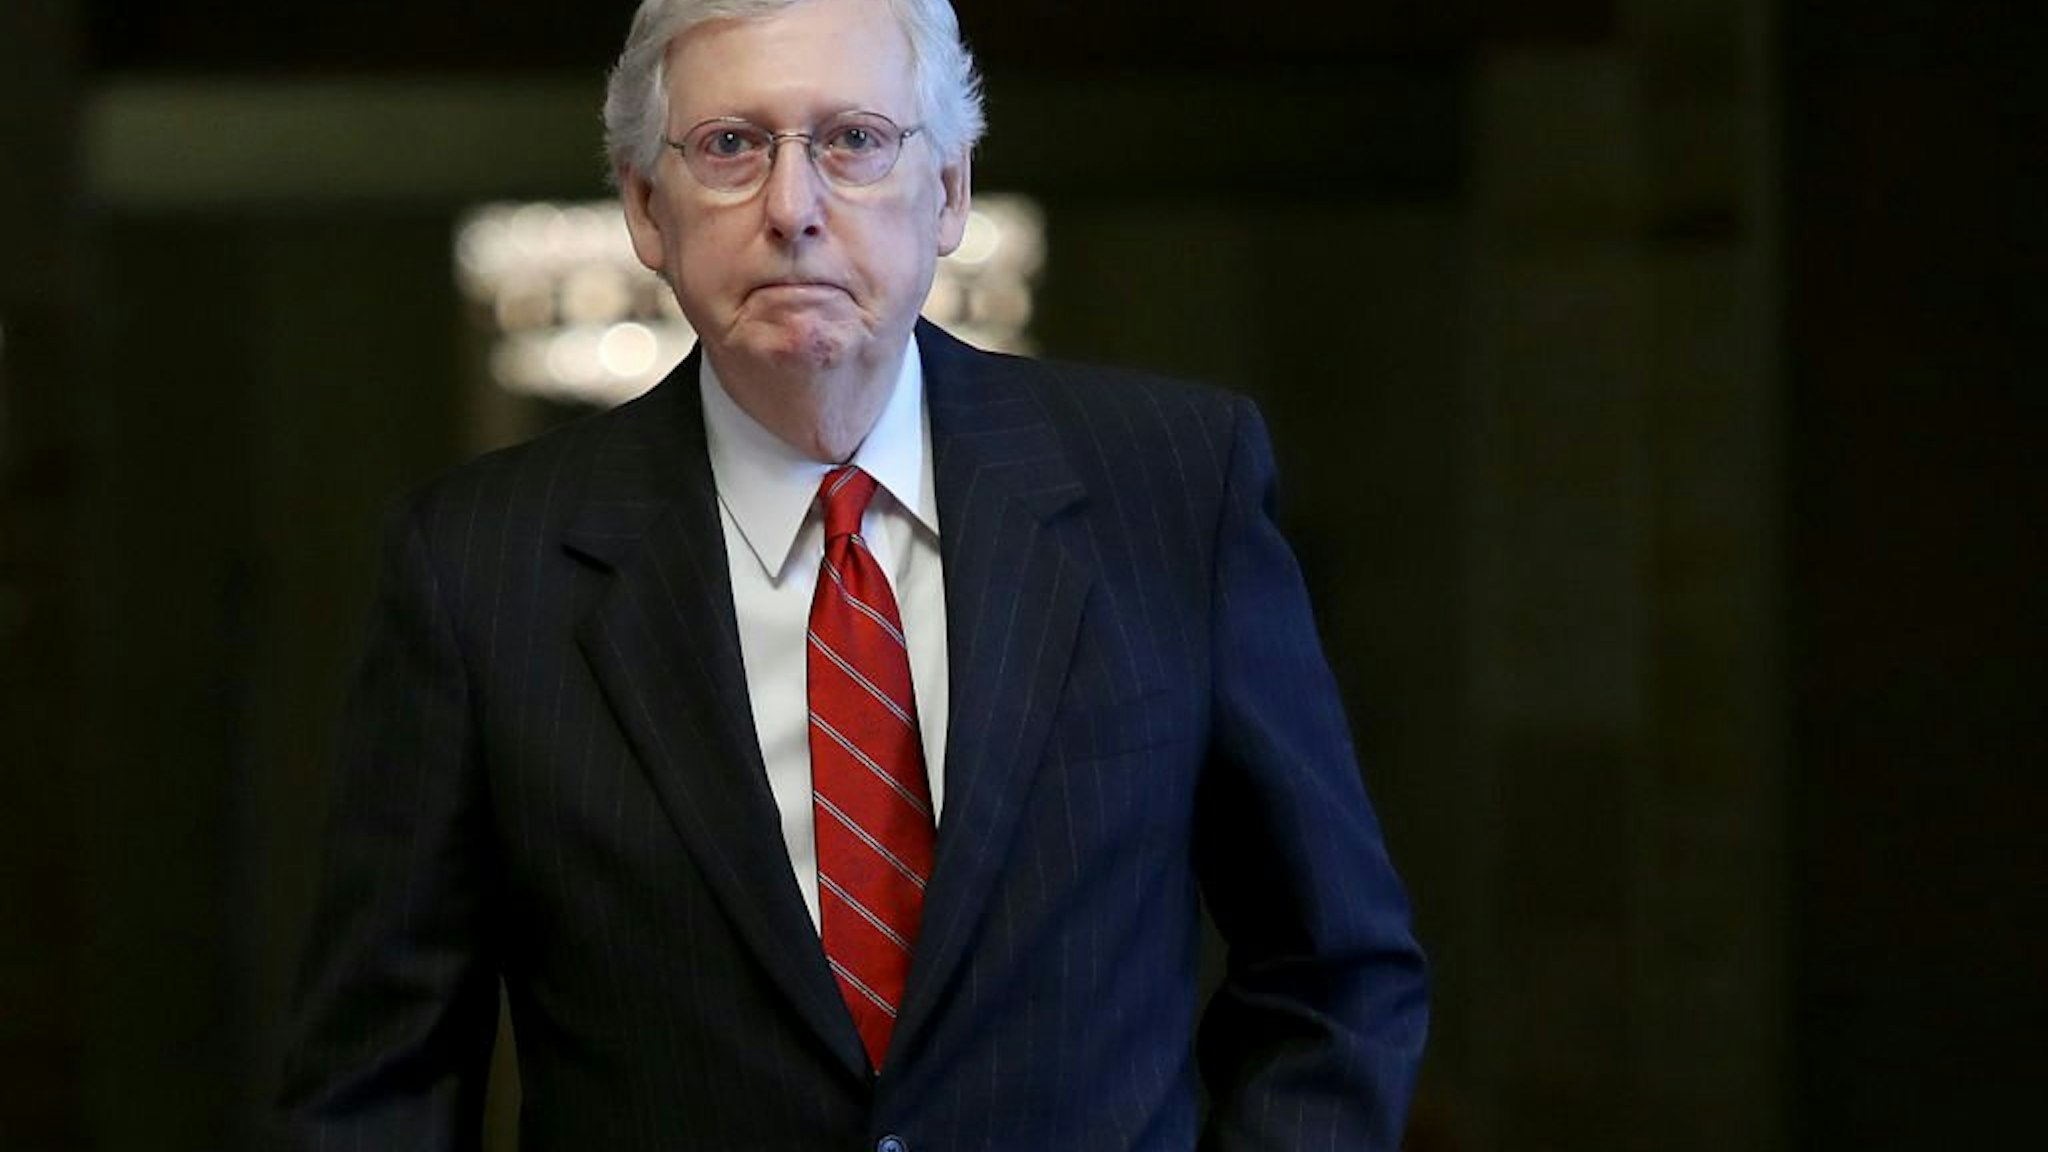 Senate Majority Leader Mitch McConnell (R-KY) walks to a series of votes at the U.S. Capitol